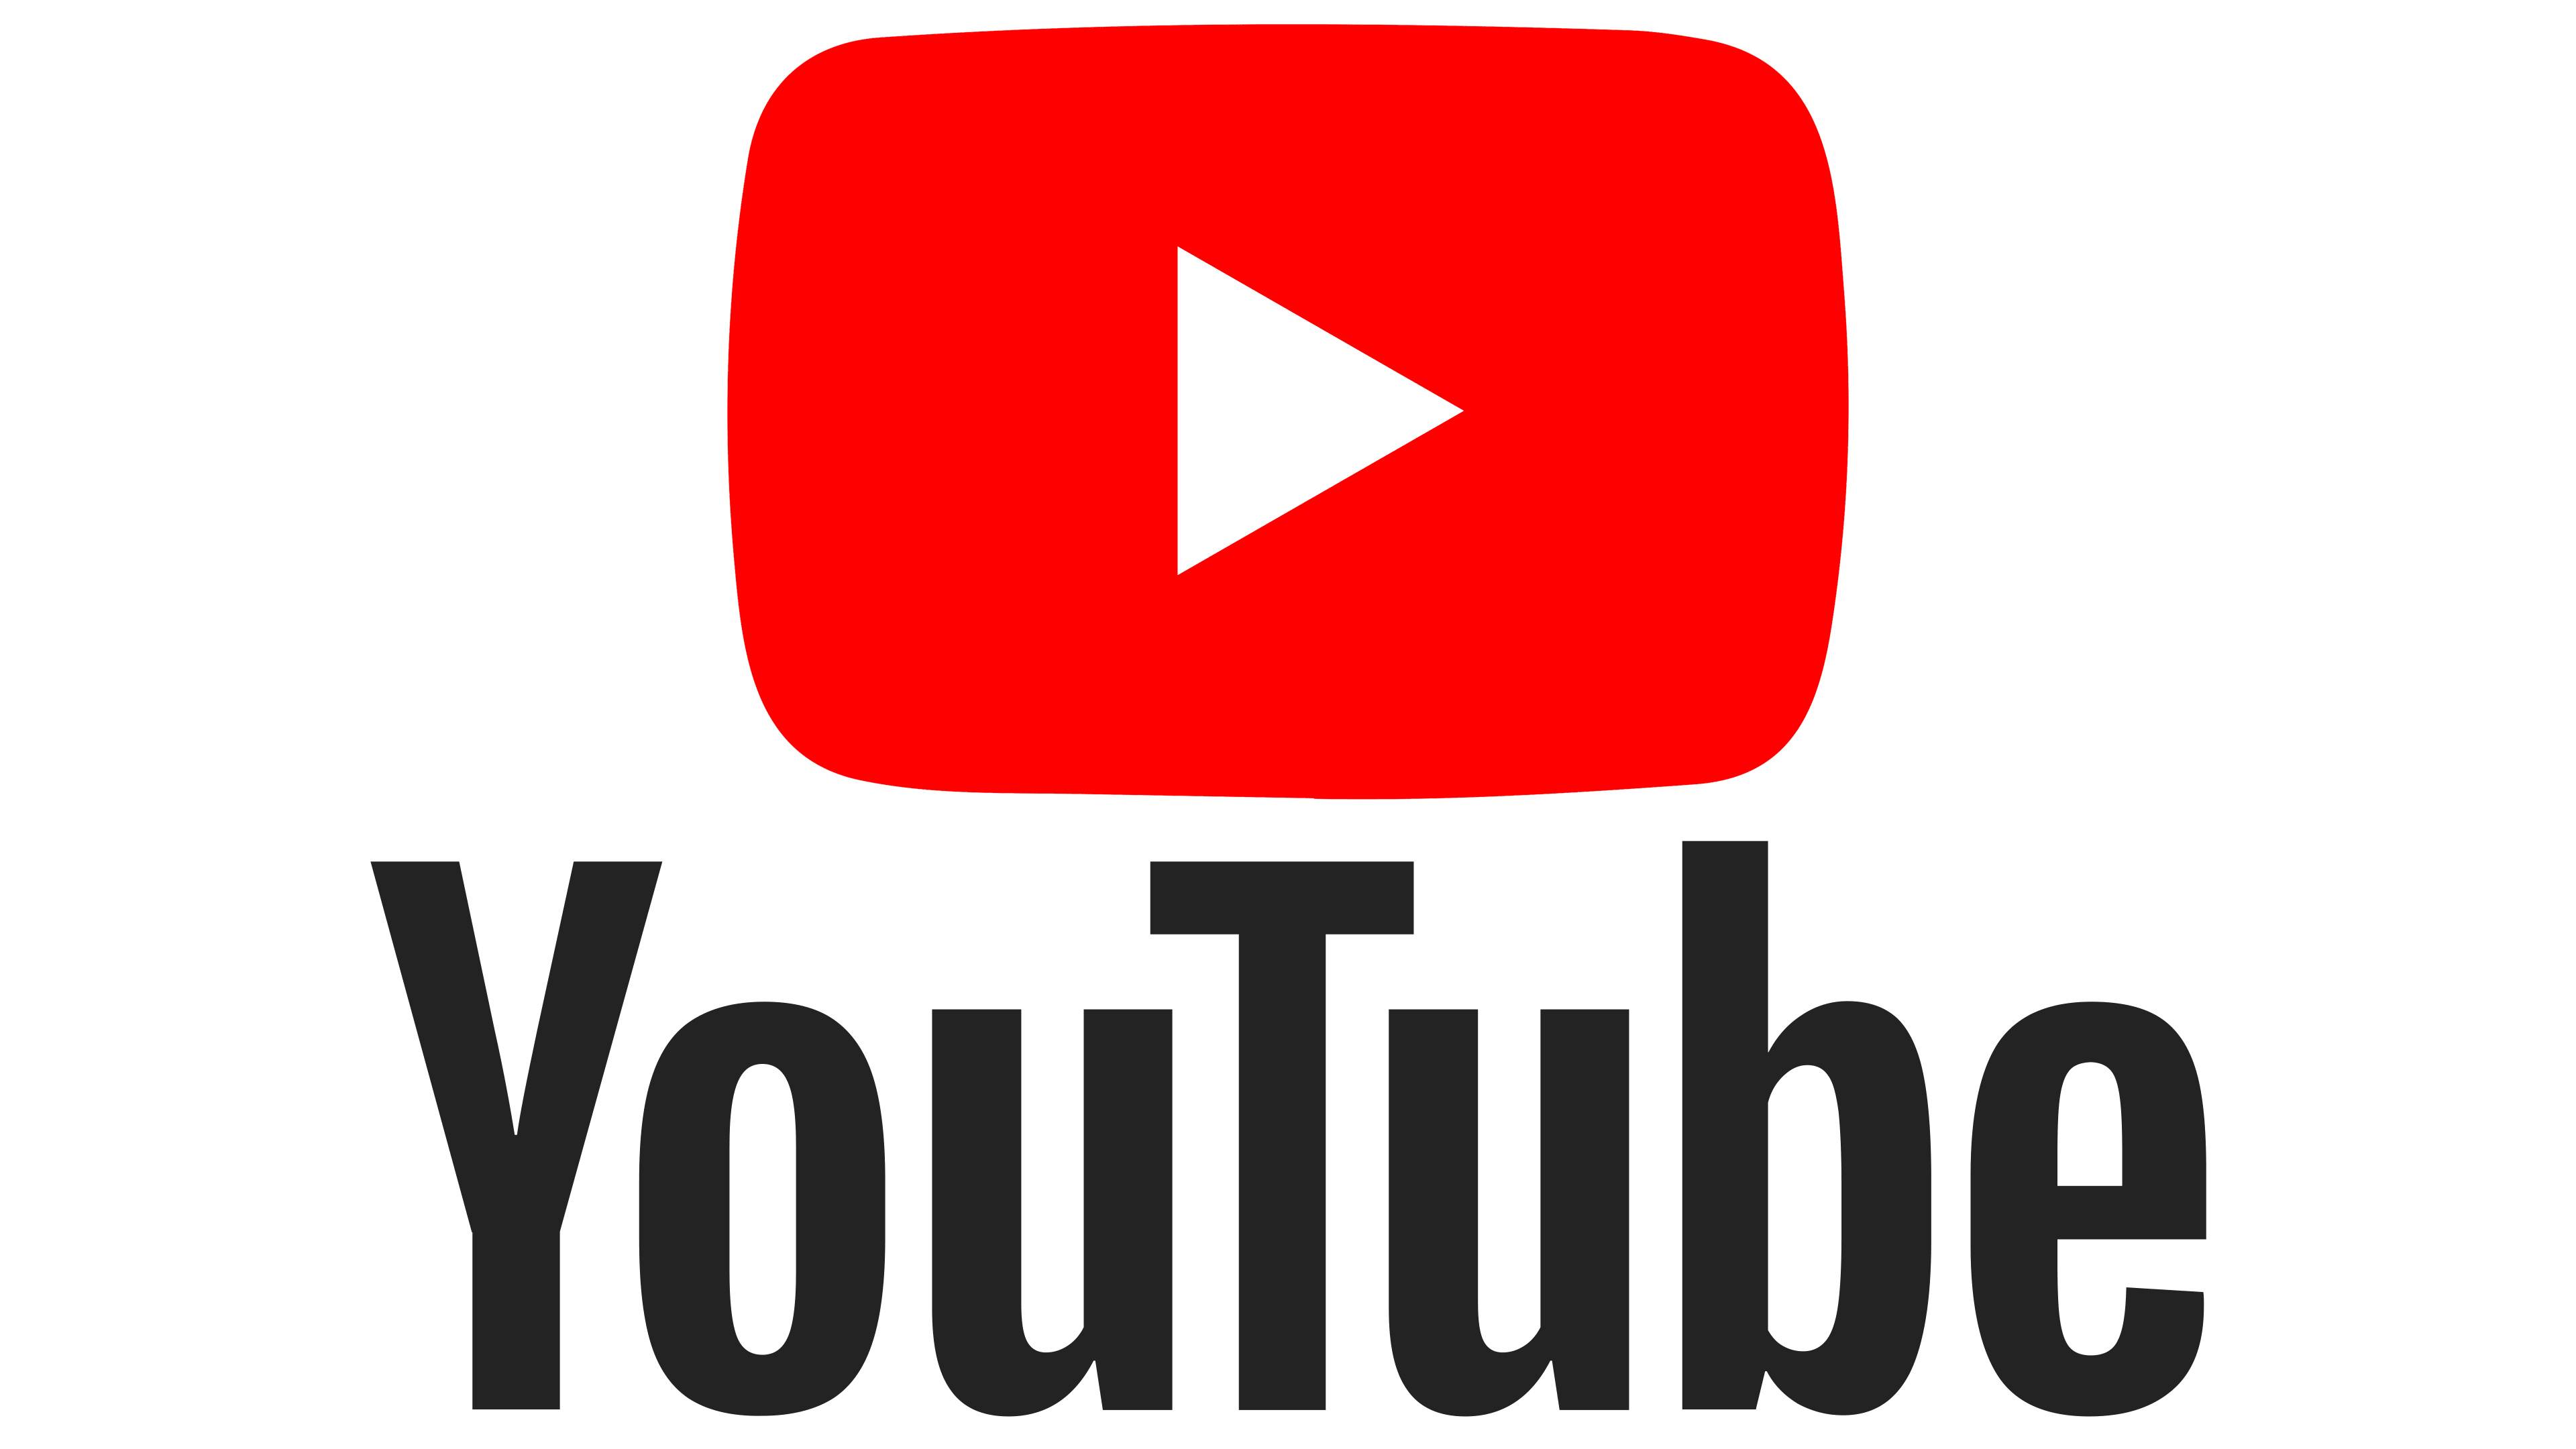 YouTube: The world’s top video hosting service, The iconic logo. 3840x2160 4K Wallpaper.